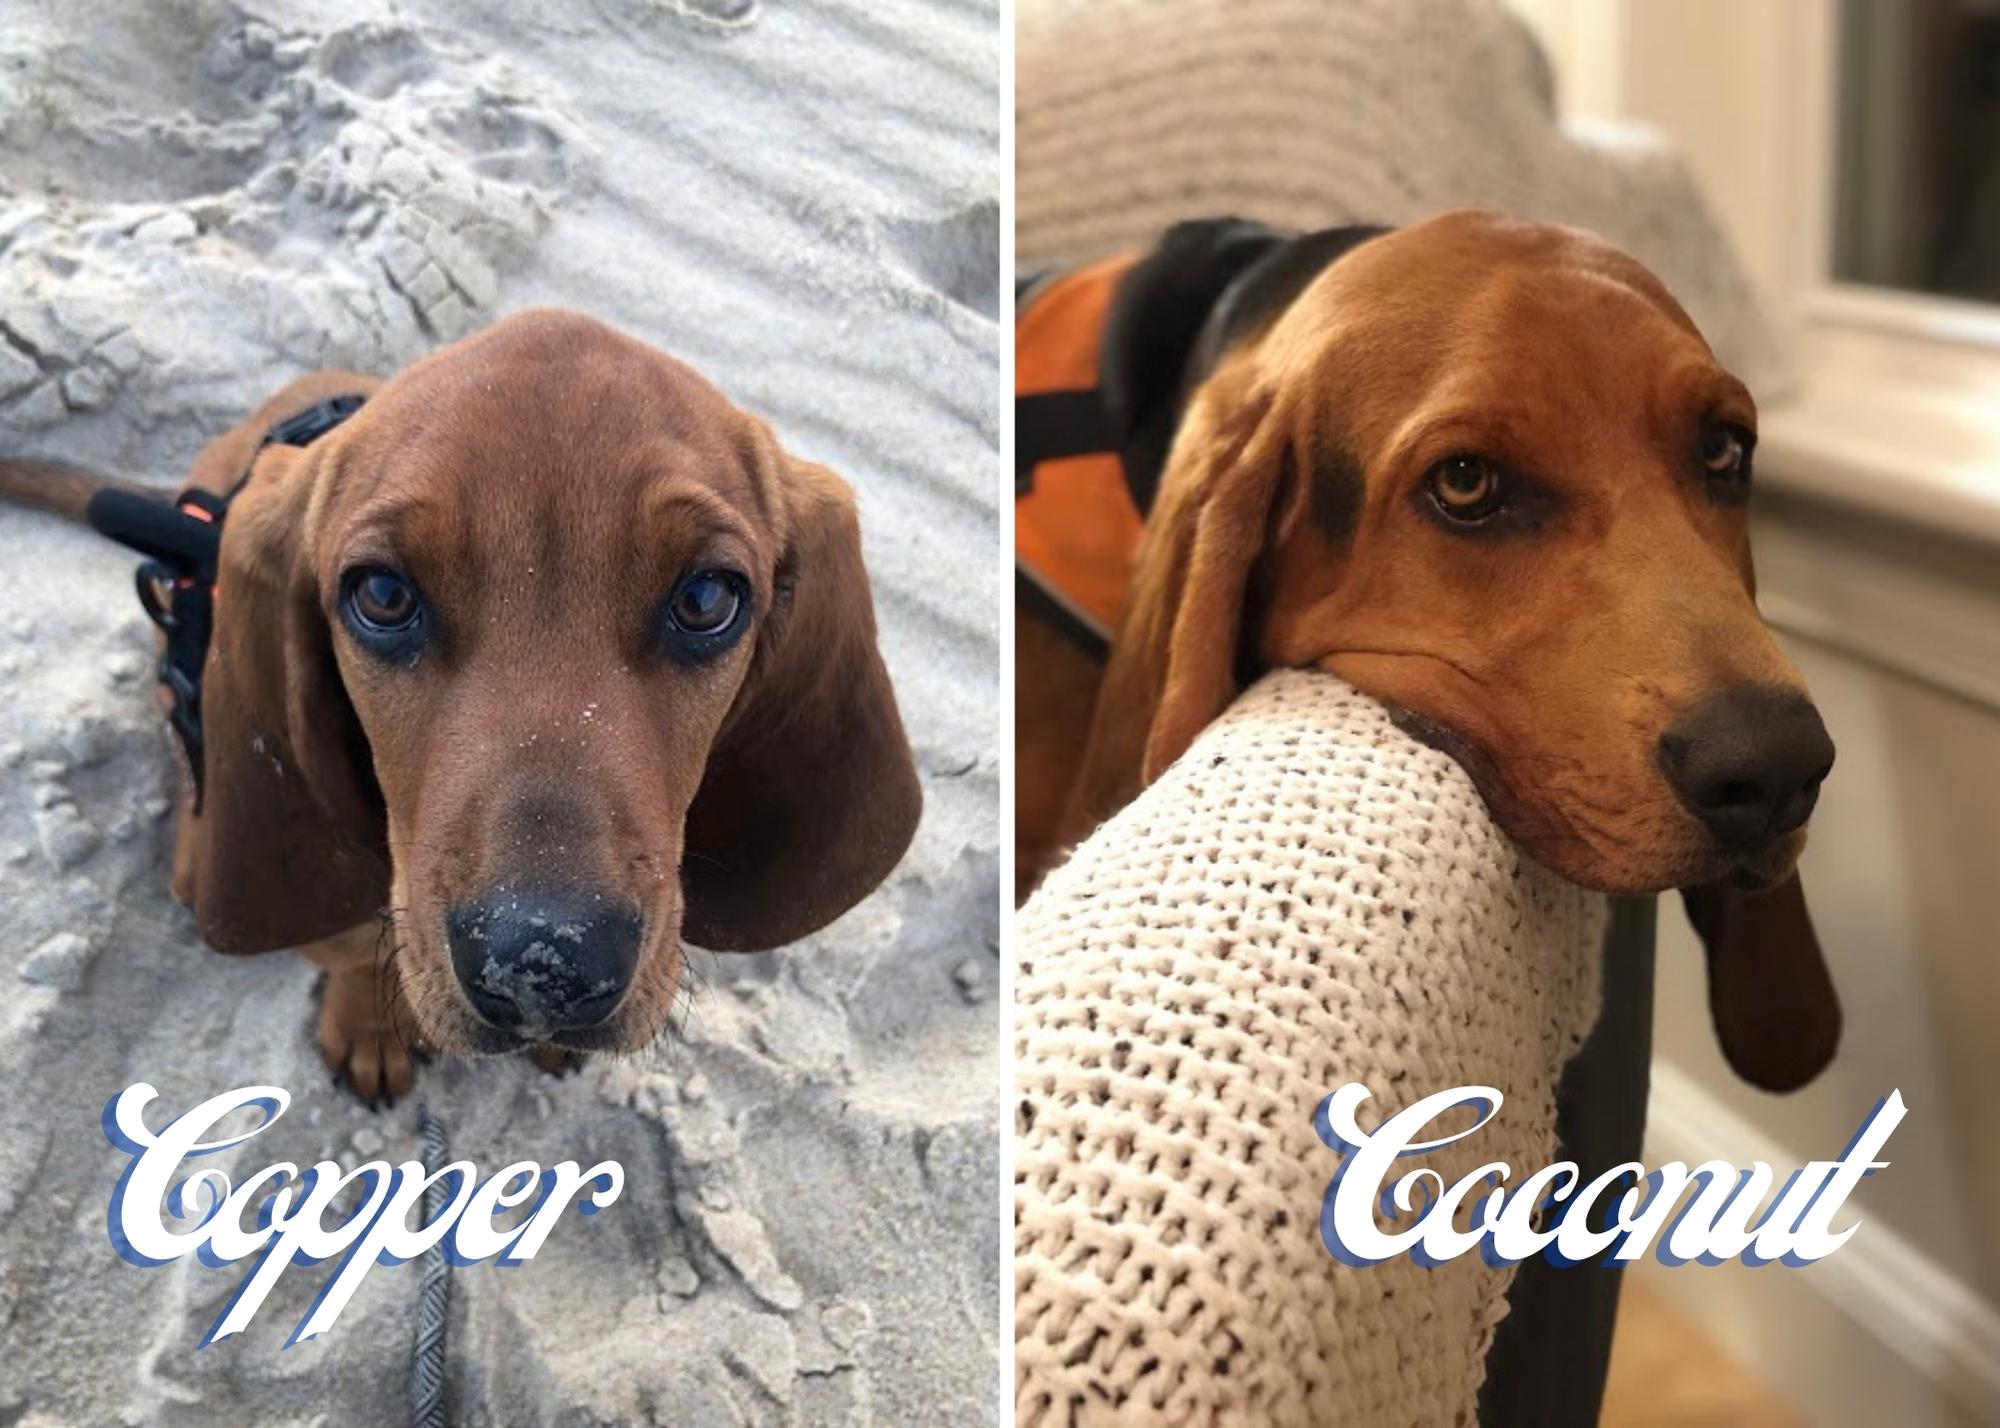 copper and coconut - september's friendly pet of the month